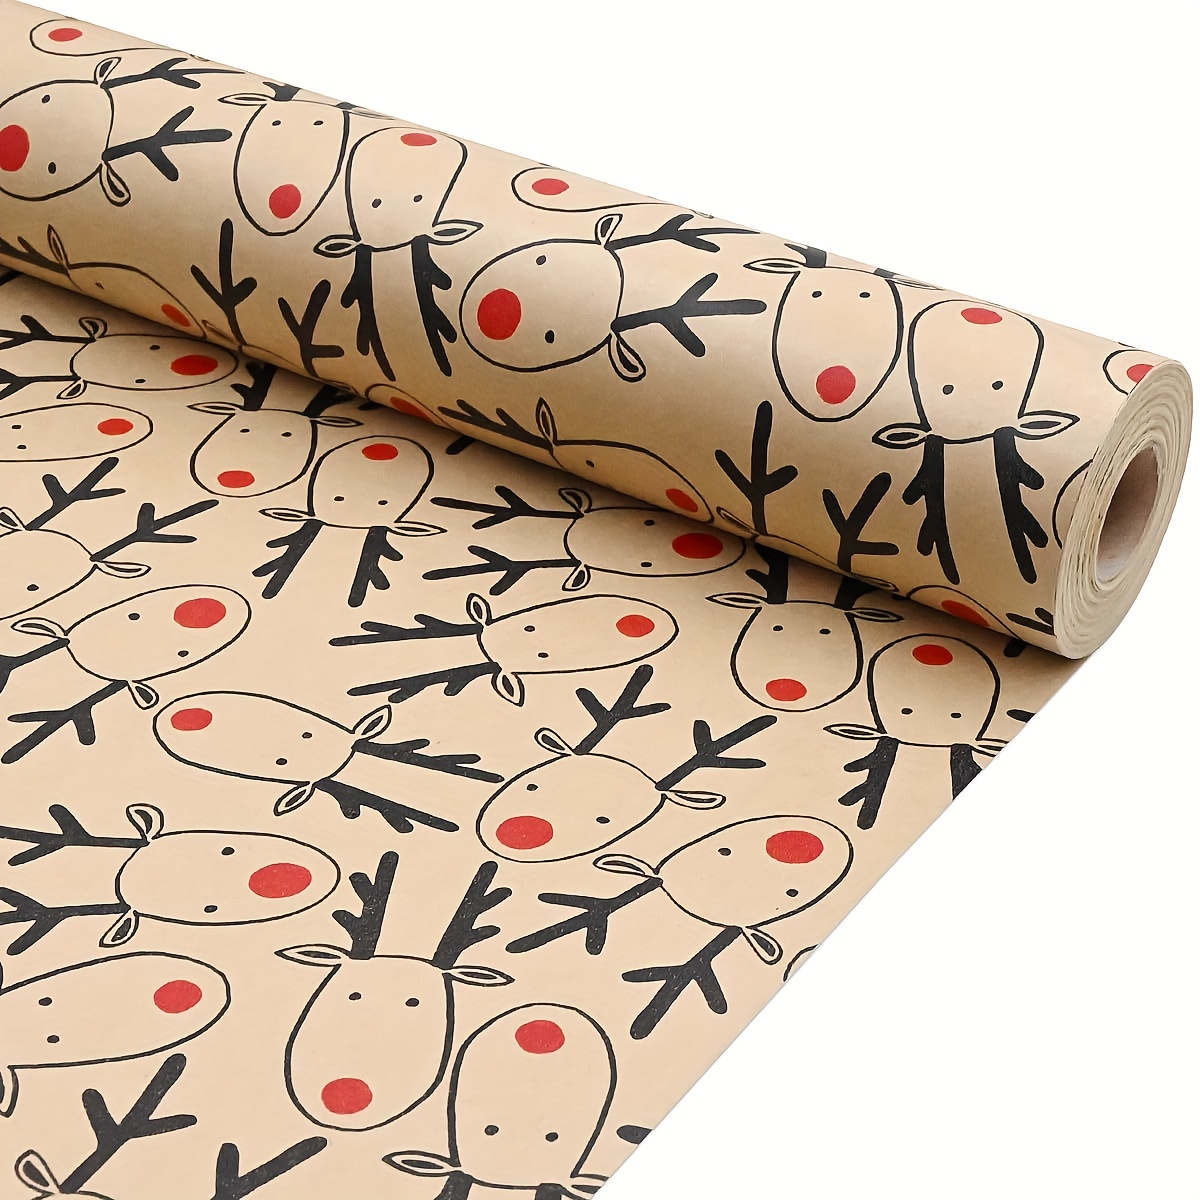 Lilo & Stitch Christmas Wrapping Paper 50 Sq.Ft